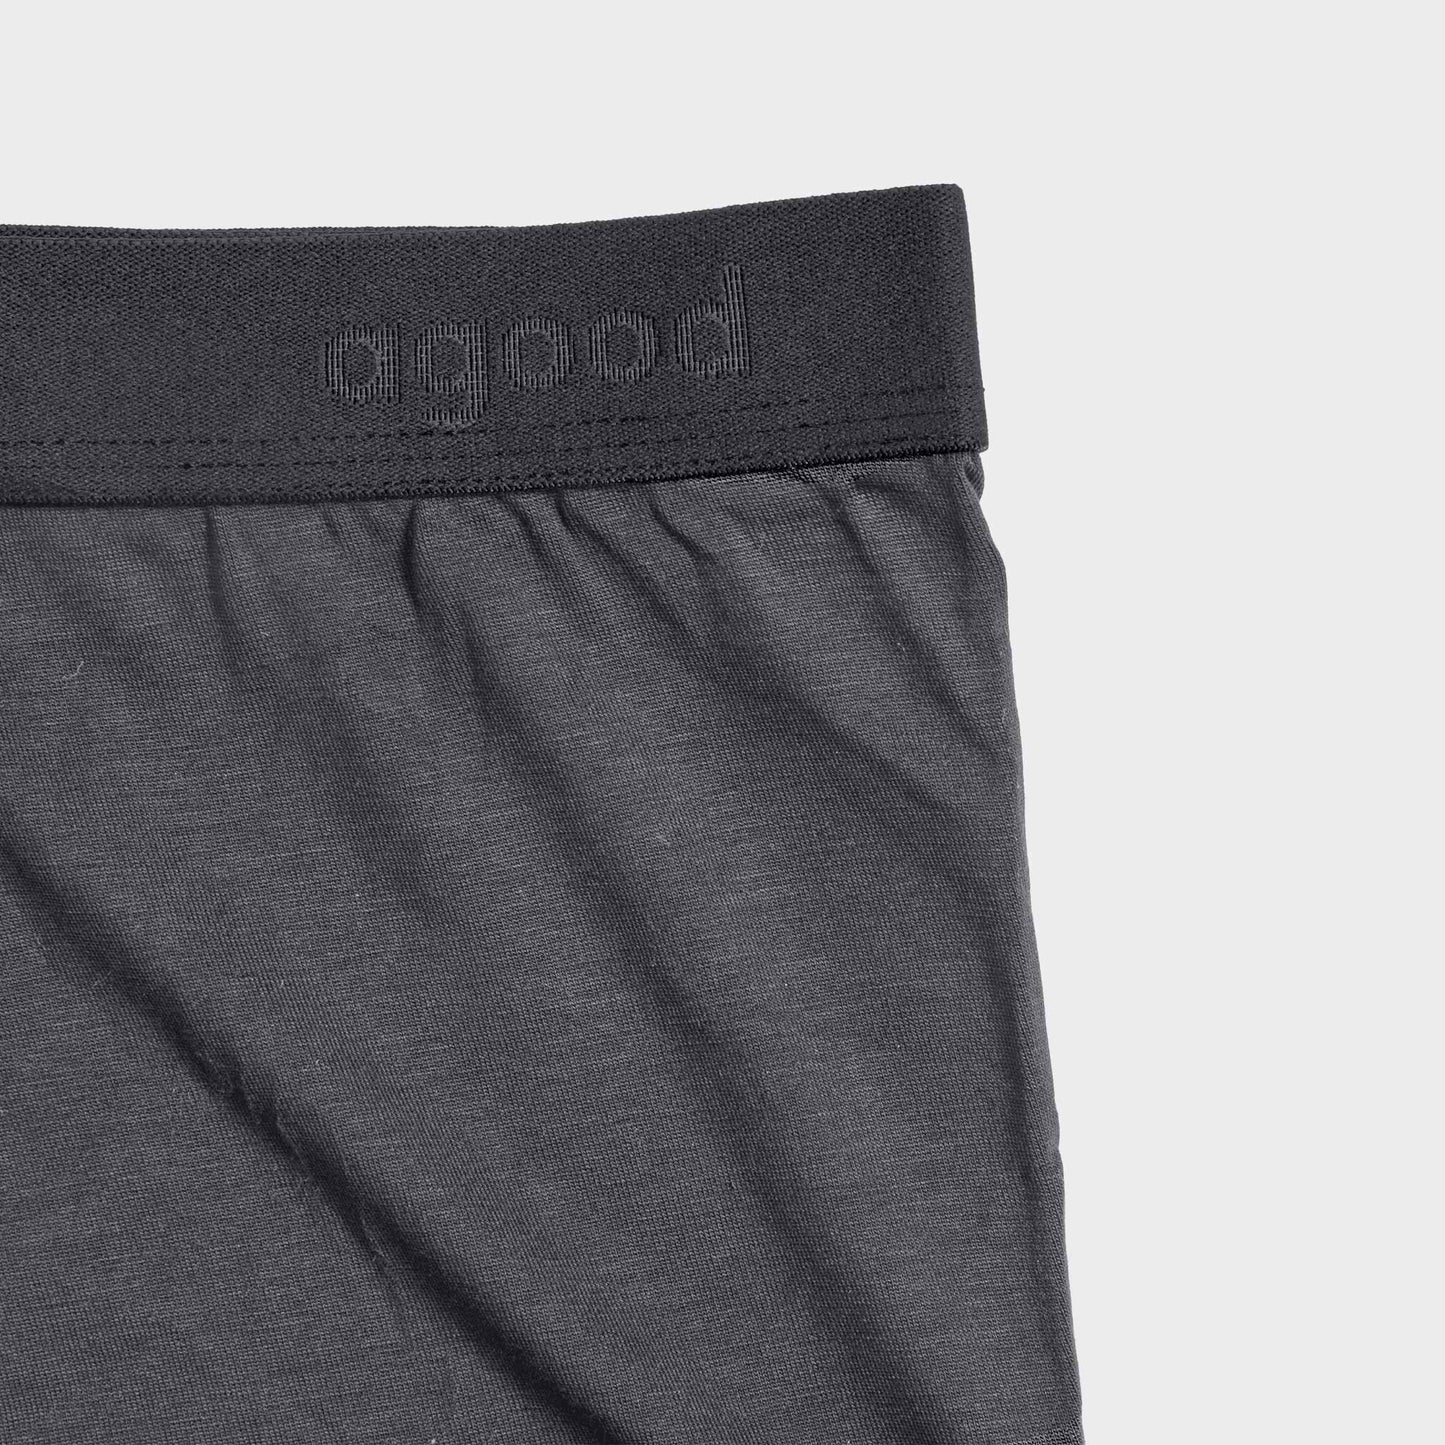 TENCEL™ Lyocell Boxer Brief Underwear for Men I 2-Pack, Charcoal